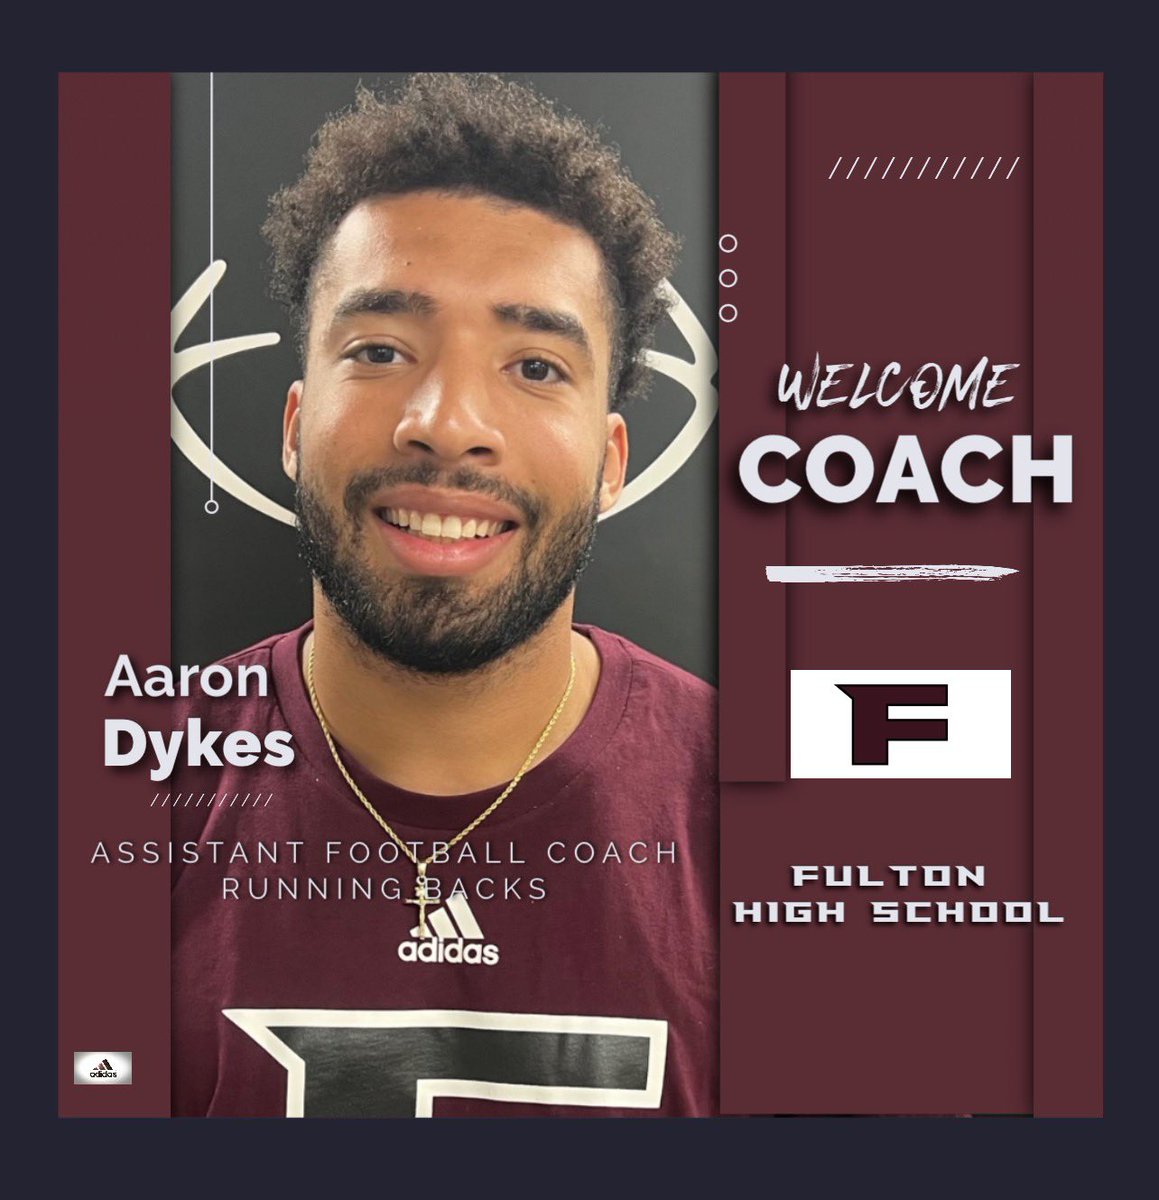 We want to welcome Coach Aaron Dykes to Falcon Country. He comes to Fulton following a great career at The University of Richmond. He will be working with our running backs. We are excited to have him as a part of the Fulton Family. #FlyWithUs